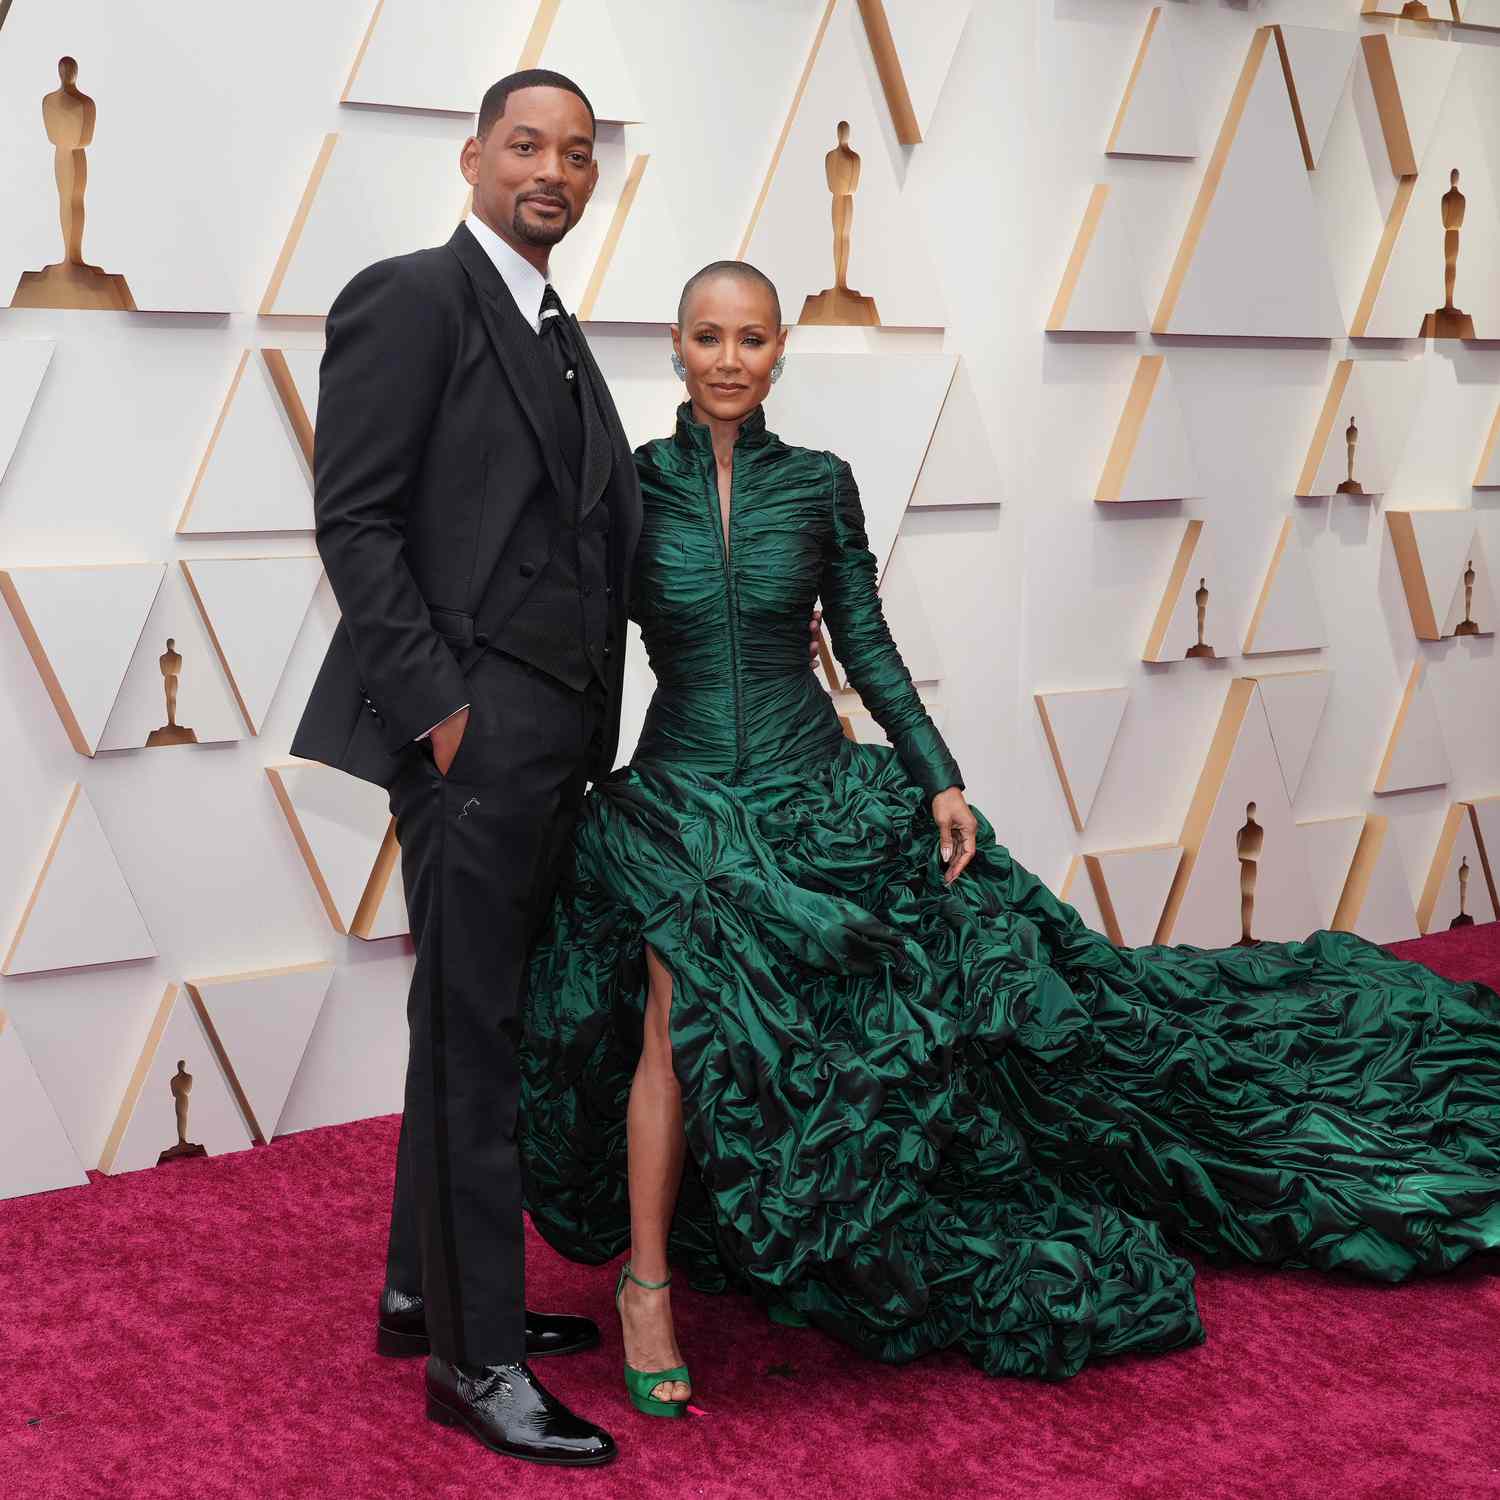 "Together till forever" - Jada Pinkett Smith speaks on separation with Will Smith